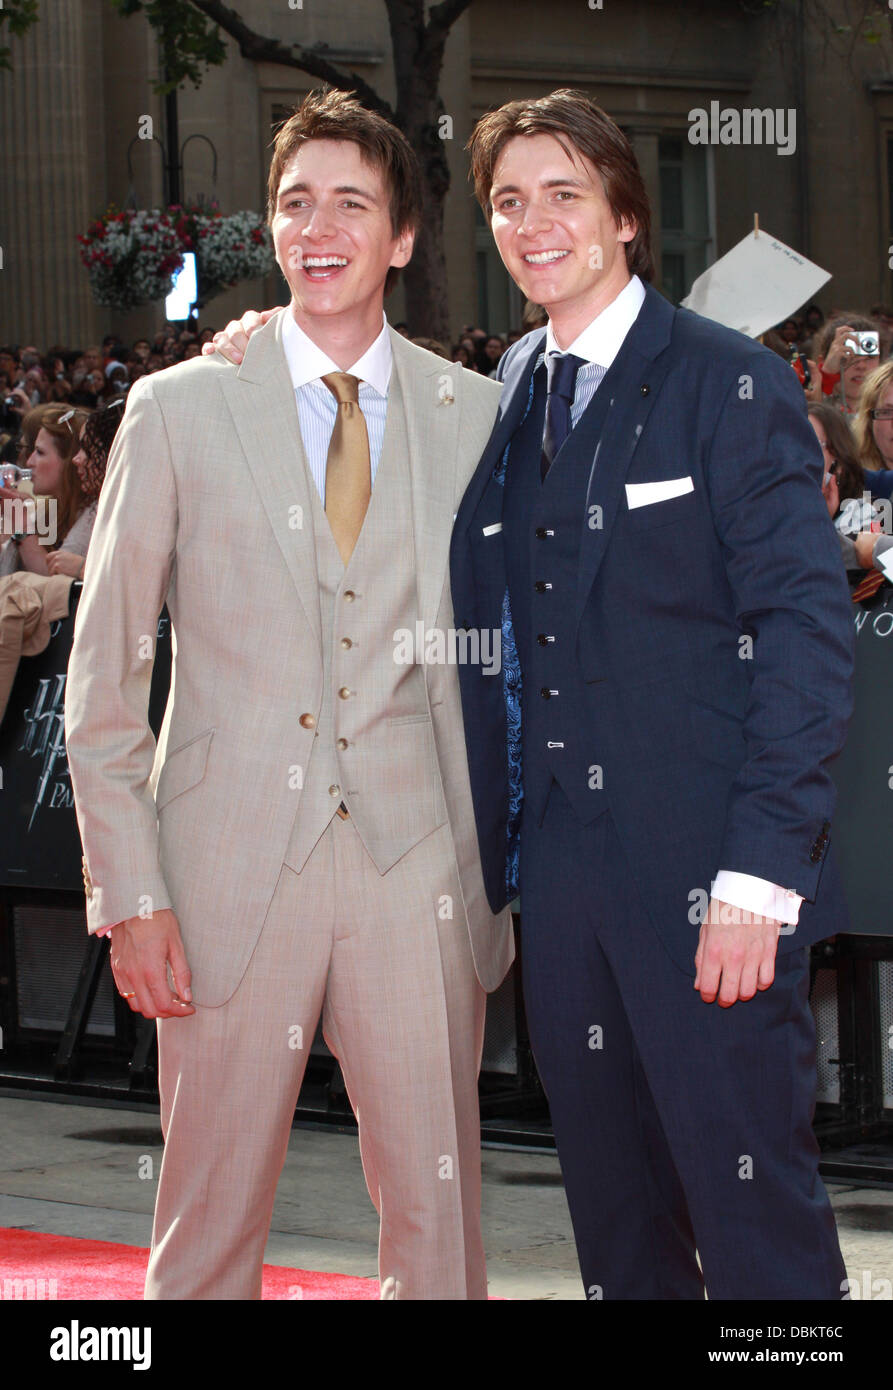 James Phelps and Oliver Phelps 'Harry Potter and The Deathly Hallows - Part  2' World Premiere - Arrivals London, England - 07.07.11 Stock Photo - Alamy